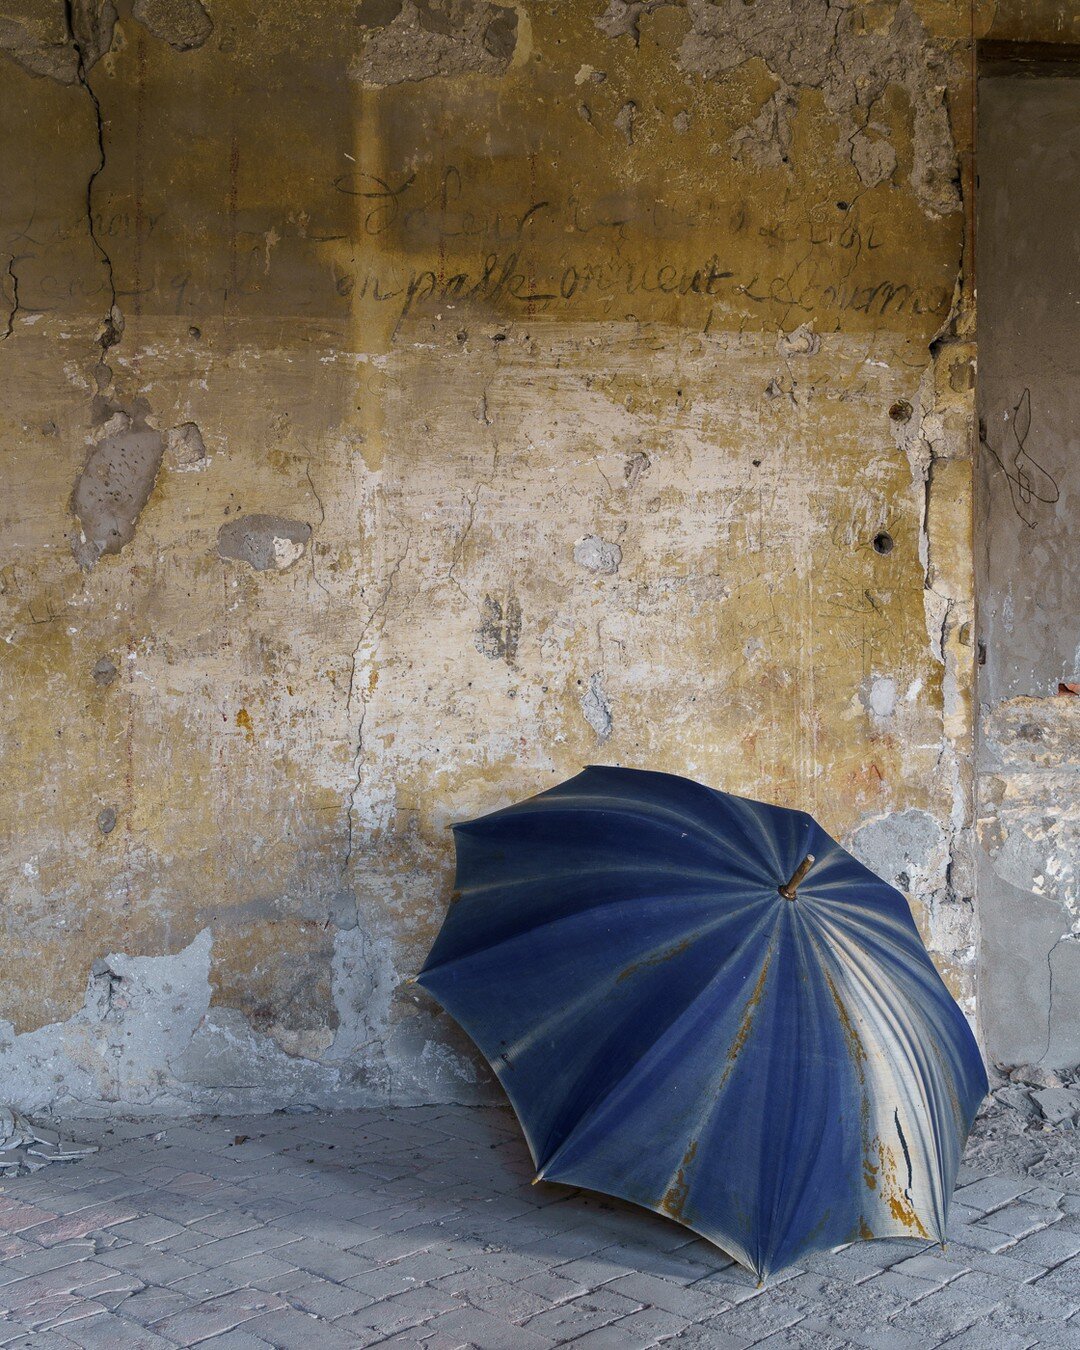 I took advantage whilst I was on a shoot last week to play around with these beautiful indigo umbrellas and these wonderful patina and stone walls. 

It's been good to get out shooting again and especially out on location. It's a huge part of what I 